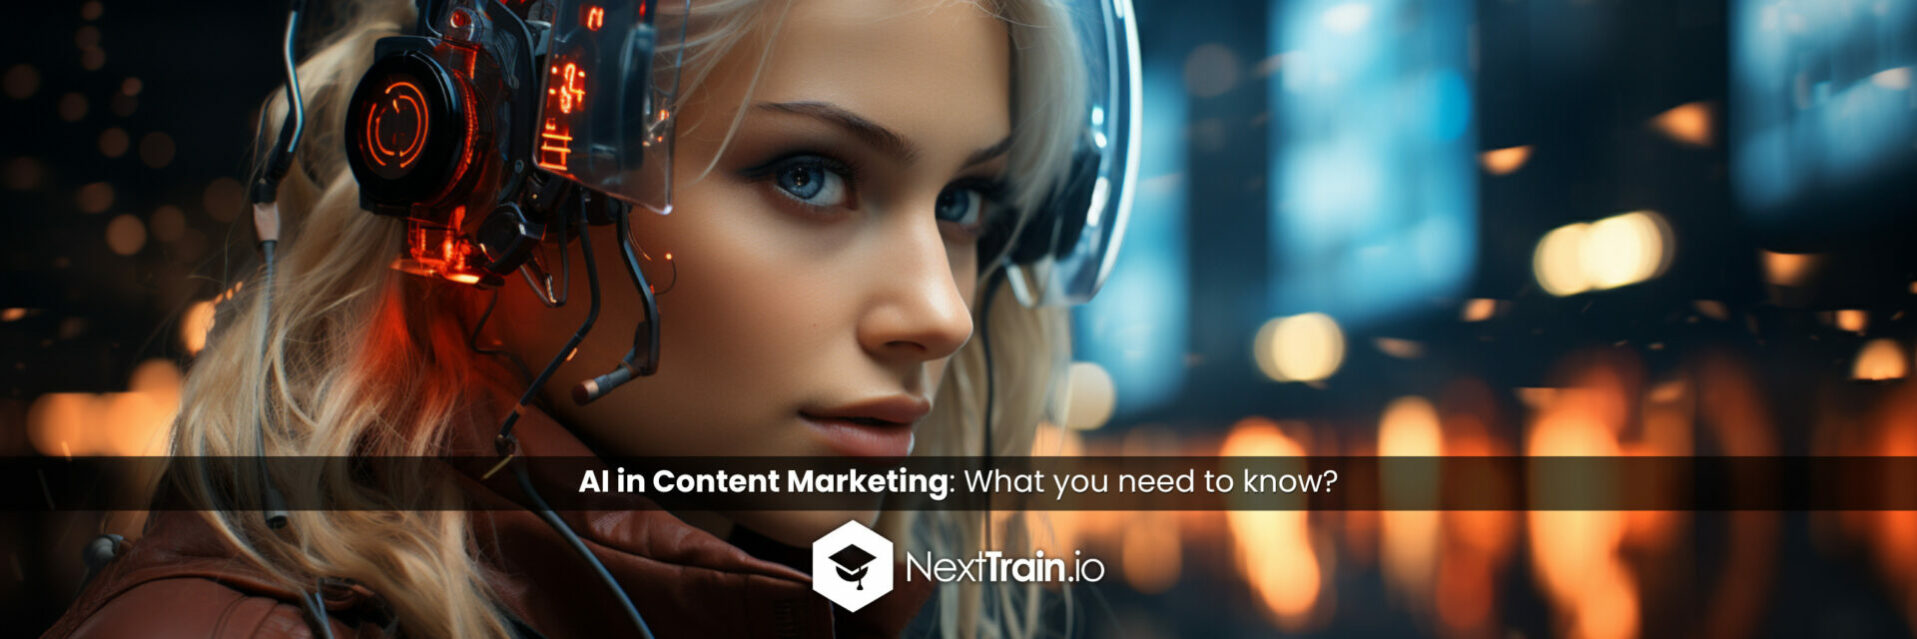 AI in Content Marketing: What you need to know?